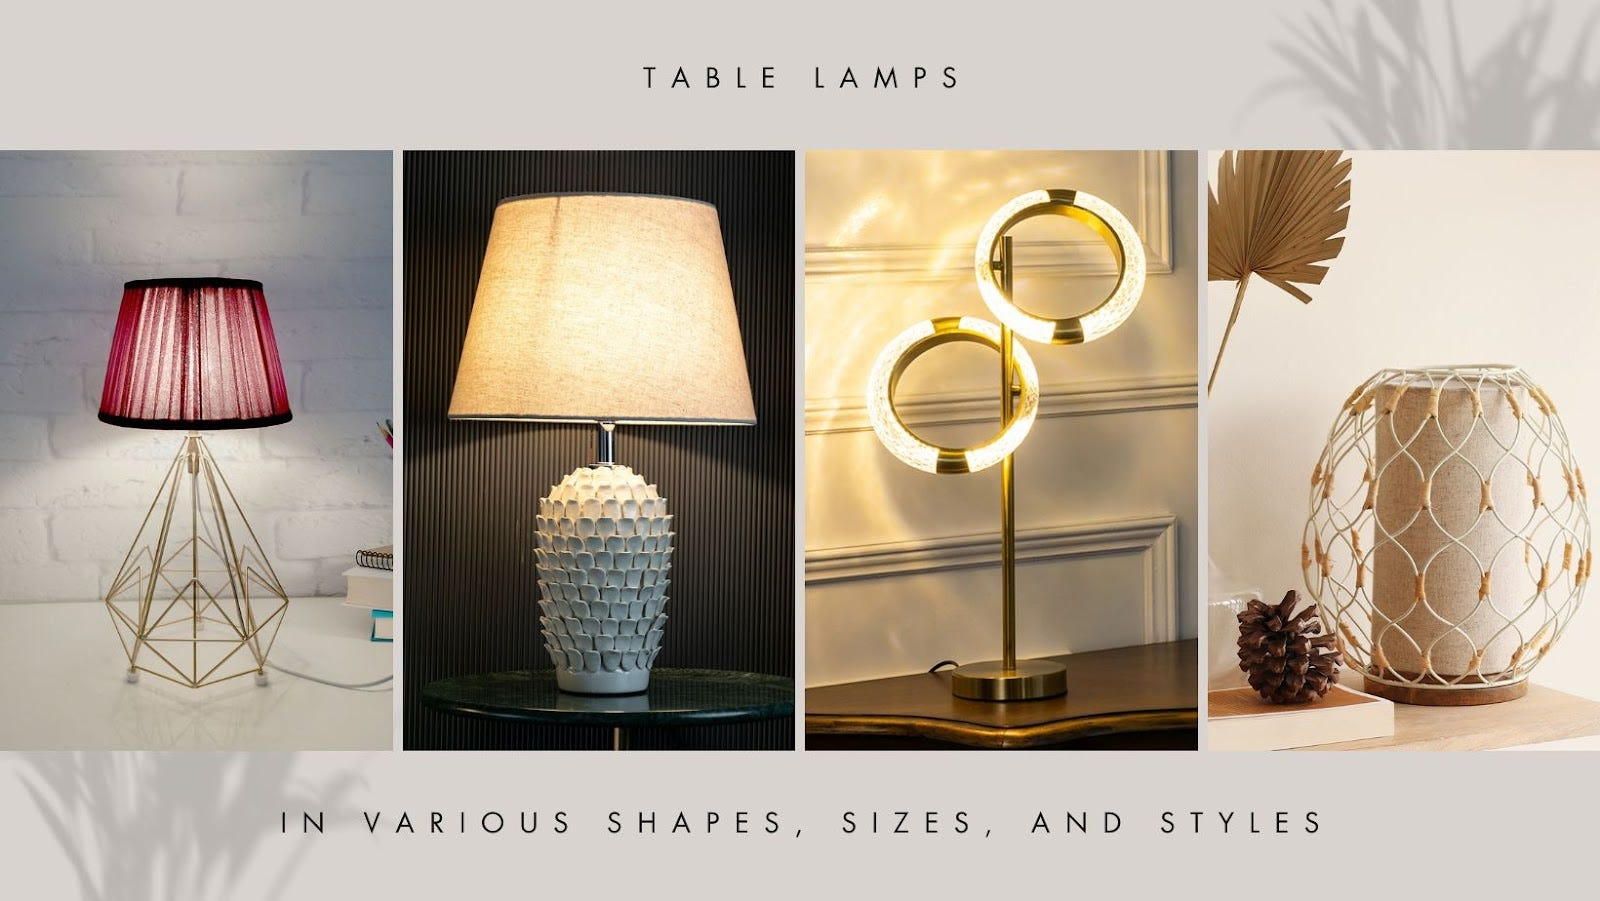 Lighting up Your Style: How to Use Lamps and Lights as Decorative Elements